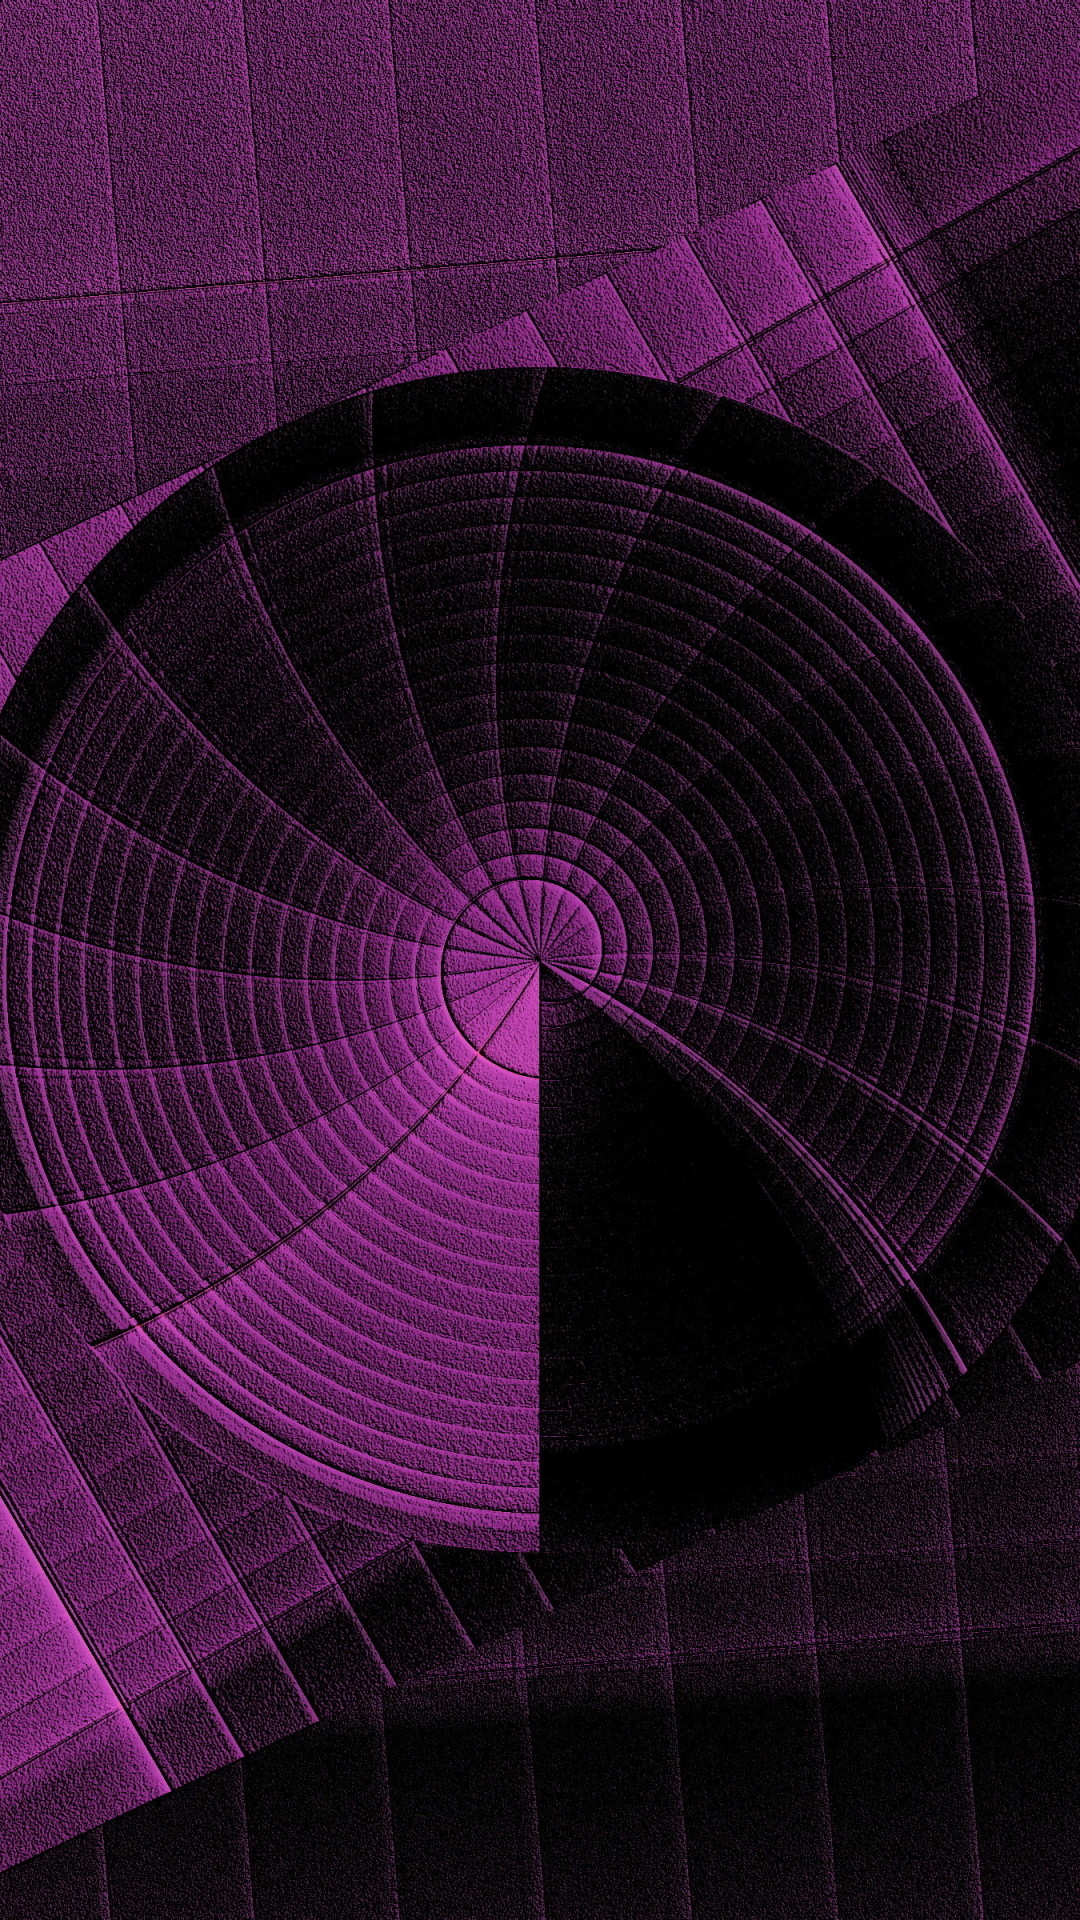 1080x1920 Abstract Purple Shapes. Wallpaper 631547